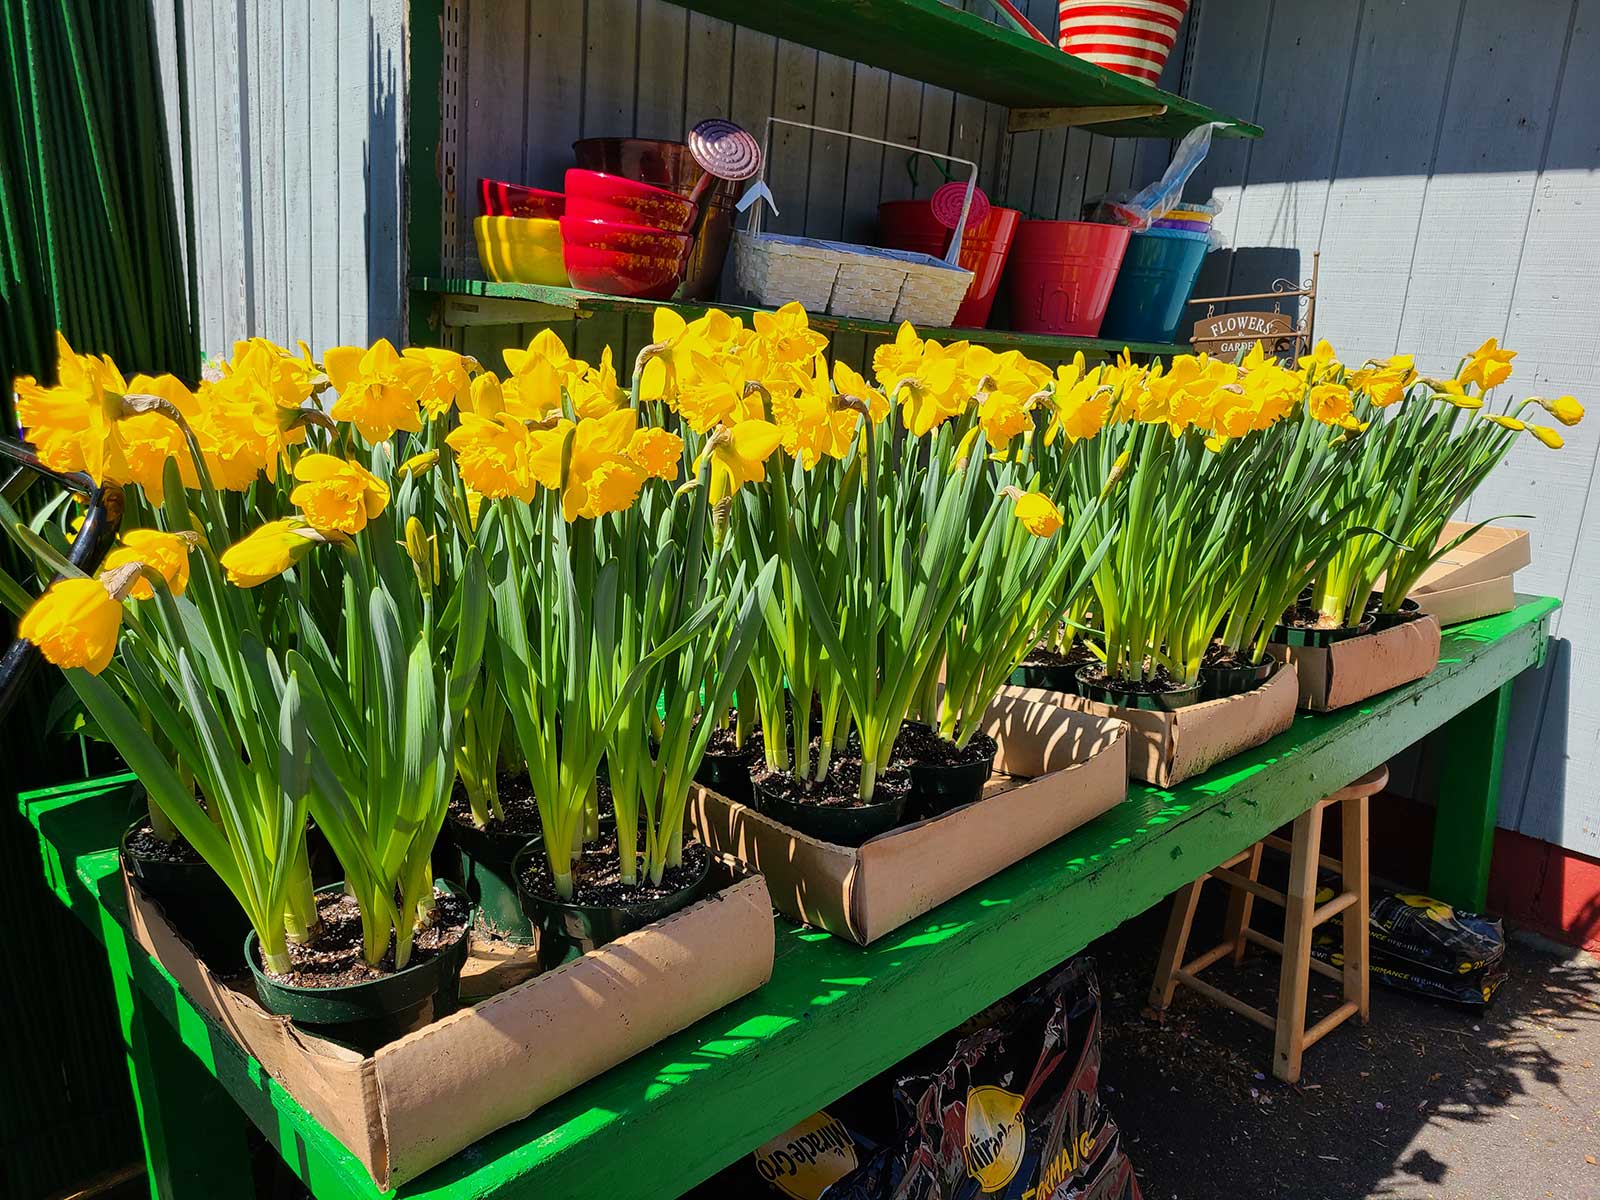 Daffodils 6 inch potted - $6.99 ea